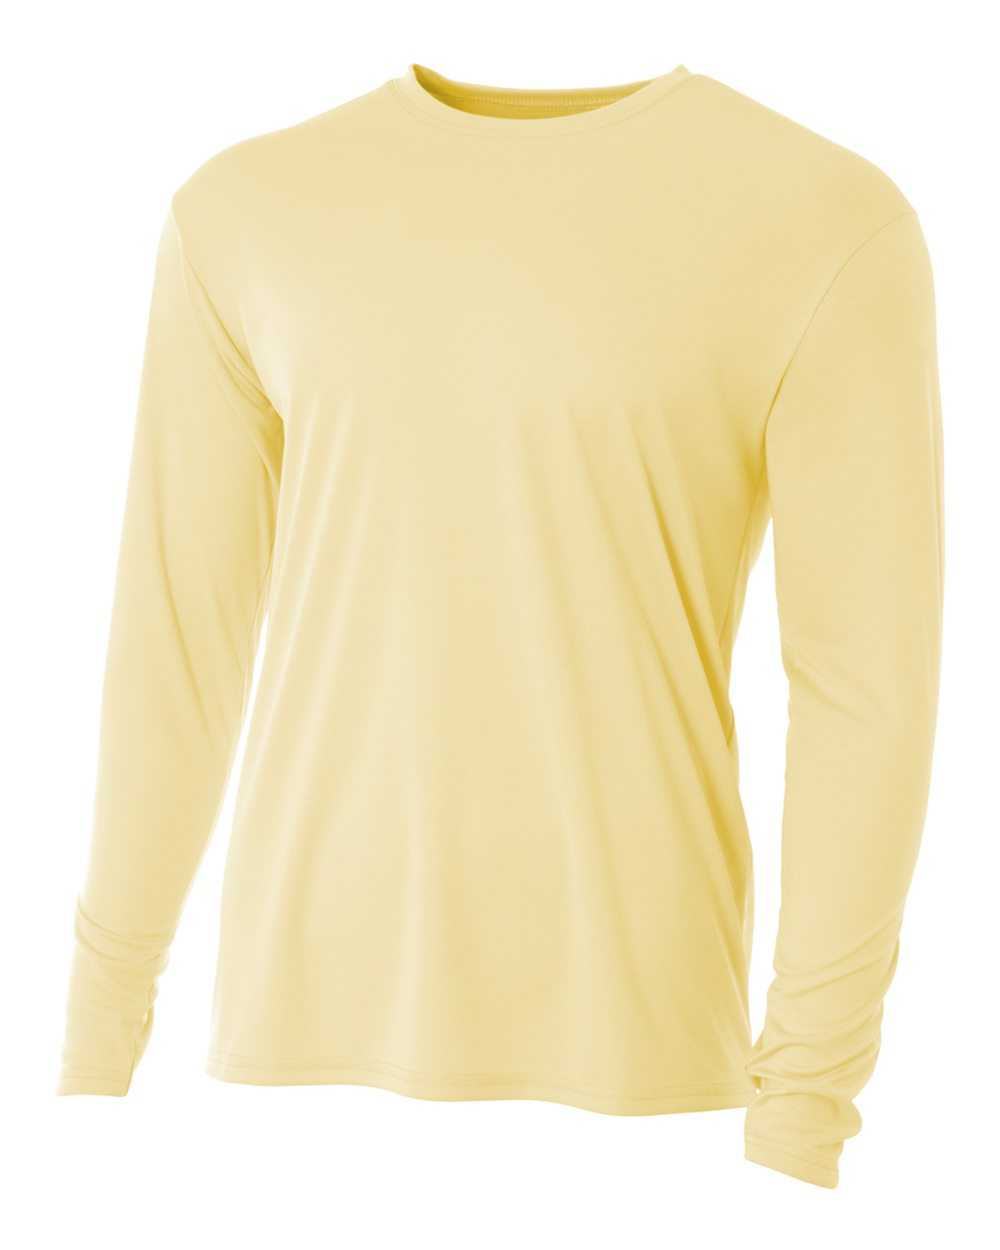 A4 N3165 Cooling Performance Long Sleeve Crew - Light Yellow - HIT a Double